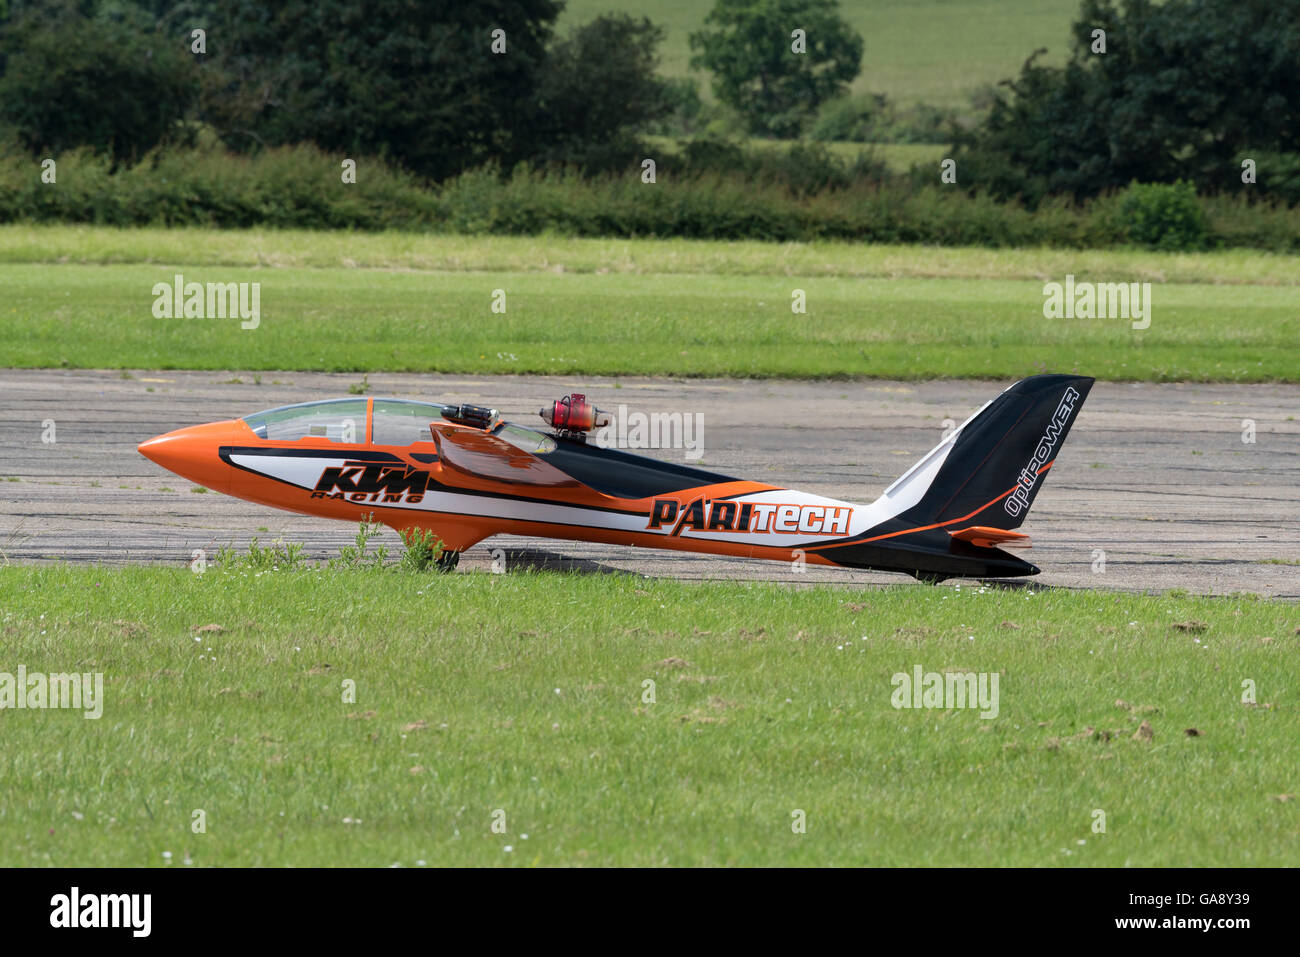 50% Fox glider jet powered on runway ready for takeoff Wings 'n' Wheels North Weald airfield Epping Essex England Stock Photo